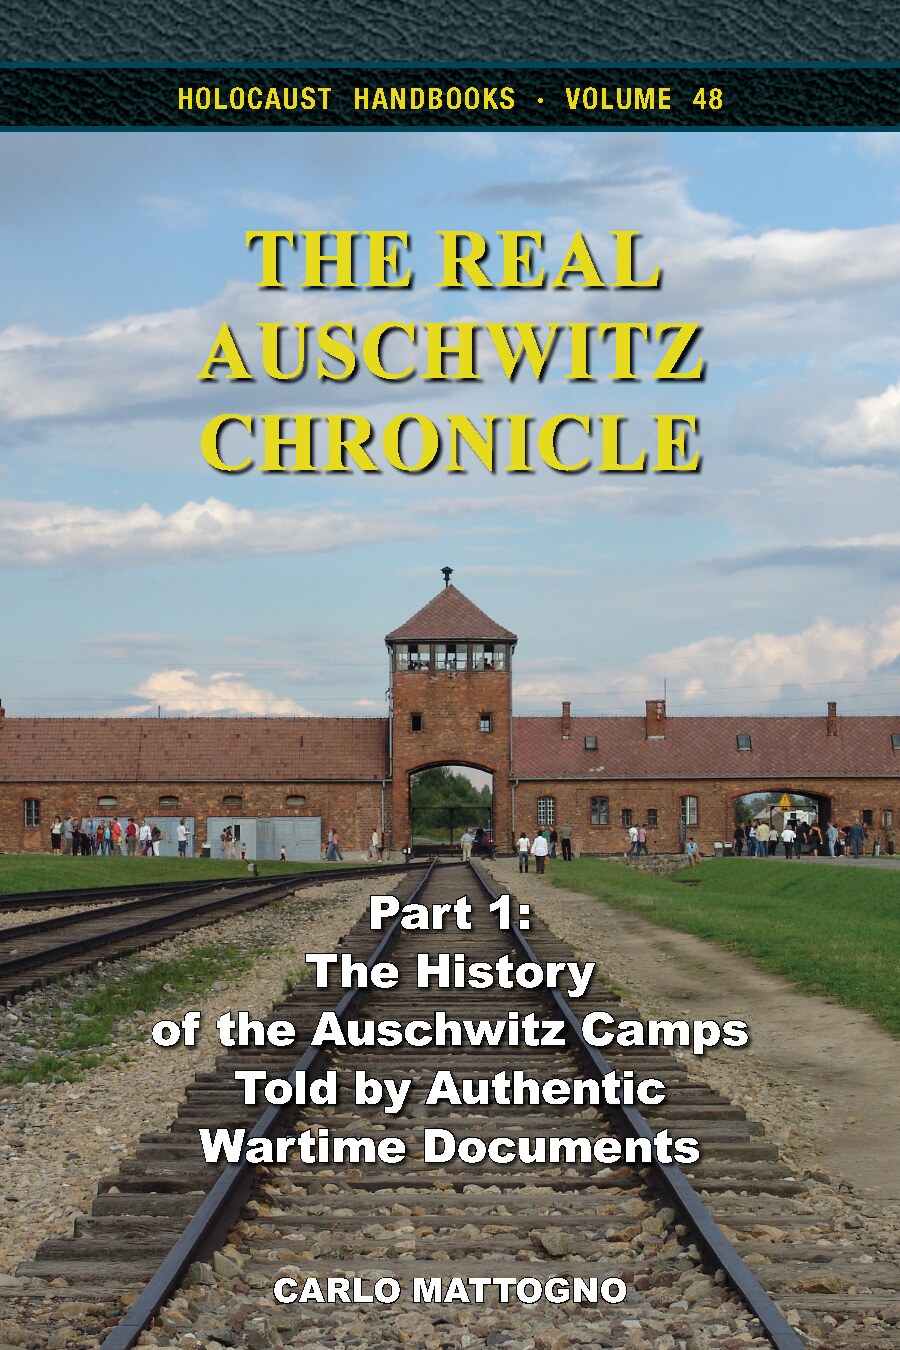 The Real Auschwitz Chronicle, Parts 1 and 2